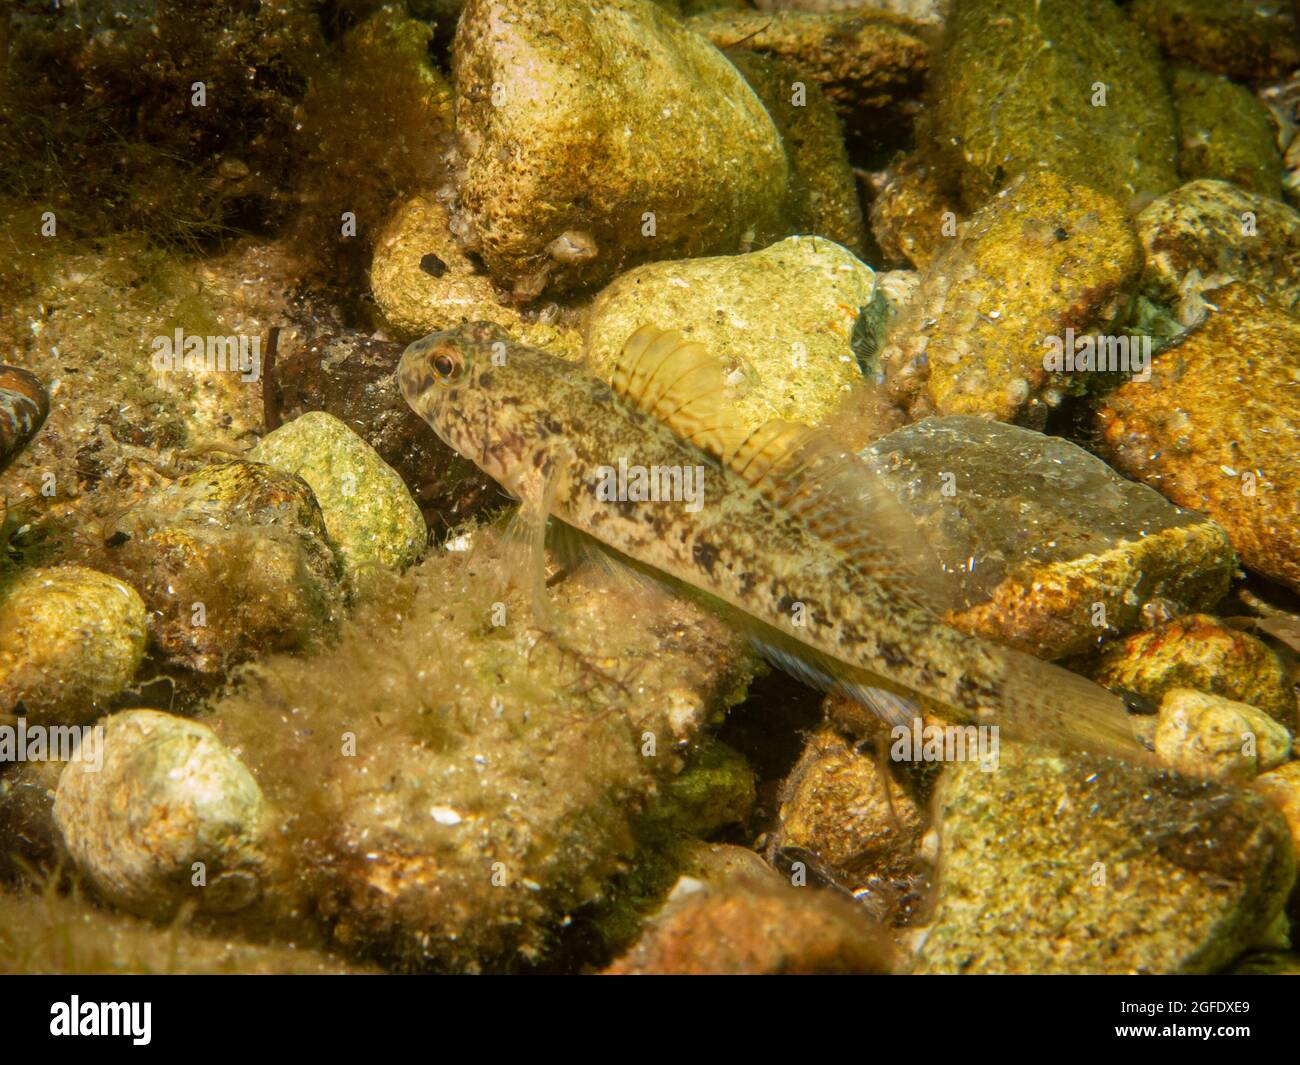 A Sandy Goby, Pomatoschistus minutus, in The Sound, the water between Sweden and Denmark Stock Photo